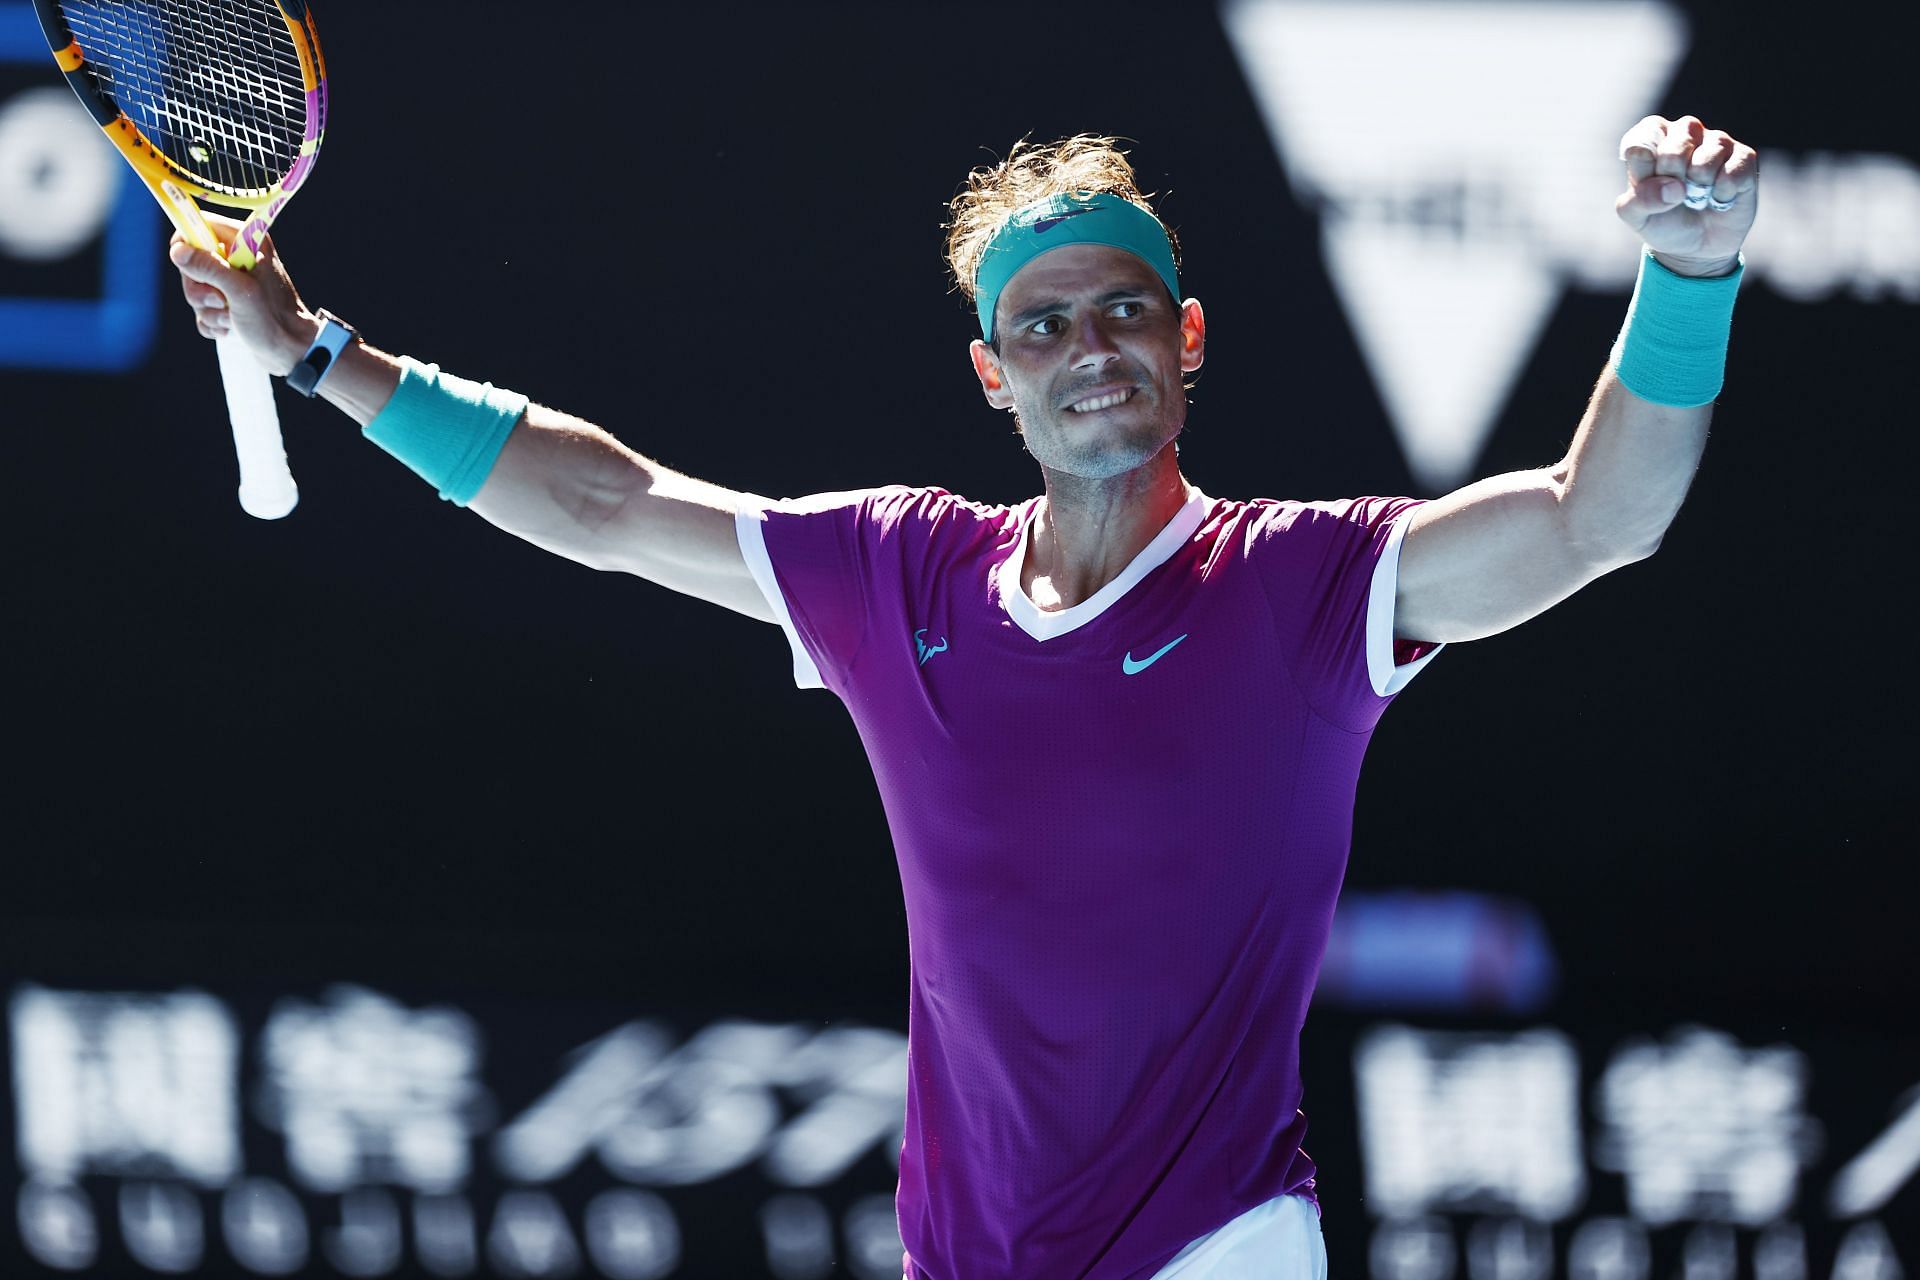 Rafael Nadal celebrates winning his second-round match in Melbourne on Wednesday